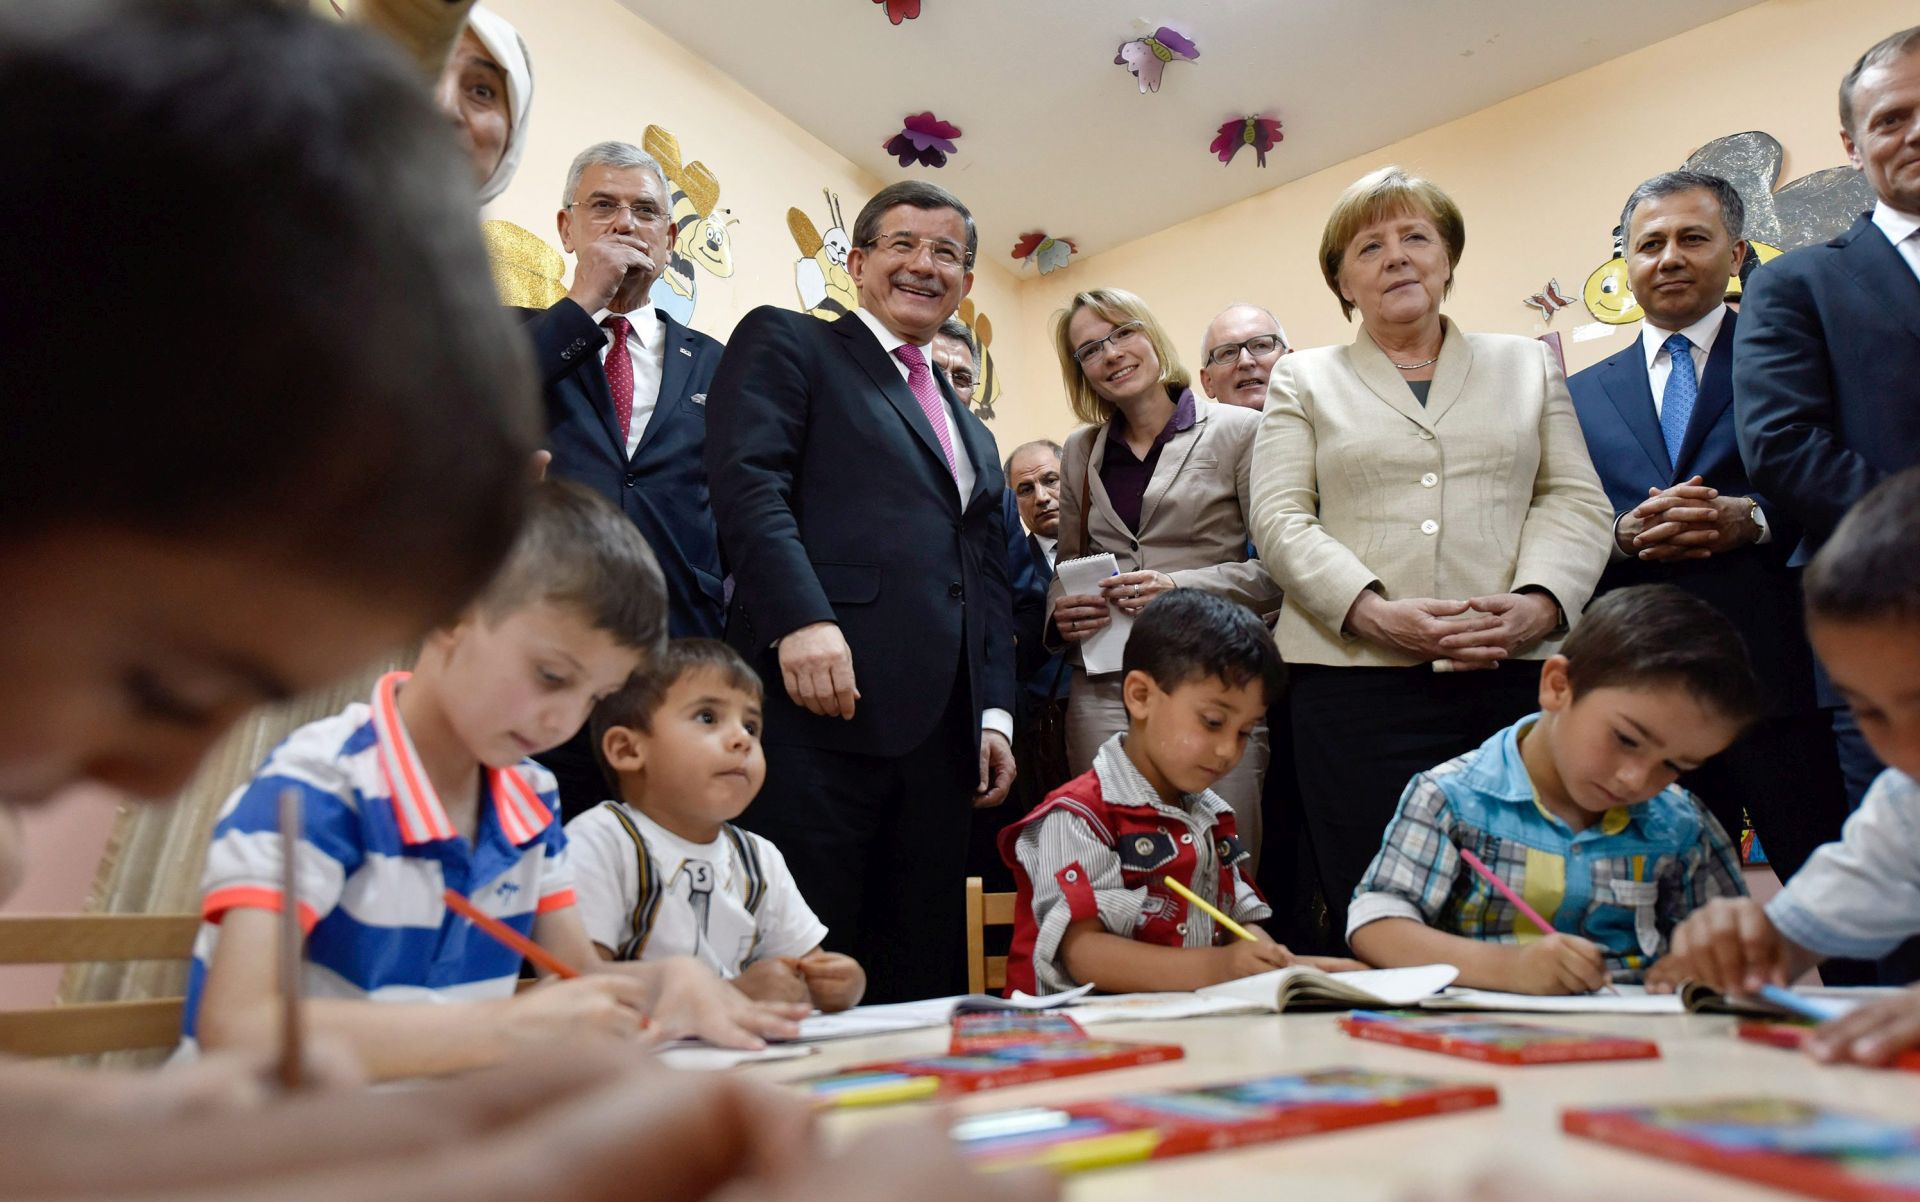 epa05274049 epa05273727 A handout picture provided by the German Federal Government shows German Chancellor Angela Merkel (3-R) as she visits a pre-school class with the Turkish Prime Minister Ahmet Davutoglu (2-L) at the Nizip I refugee camp in Gaziantep, Turkey, 23 April 2016. Merkel travelled to Turkey with the President of the European Council, Donald Tusk, to get informed about the implementation of the EU-Turkey Refugee Agreement.  EPA/STEFFEN KUGLER/GERMAN FEDERAL GOVERNMENT/HANDOUT MANDATORY CREDIT: STEFFEN KUGLER/GERMAN FEDERAL GOVERNMENT HANDOUT EDITORIAL USE ONLY/NO SALES